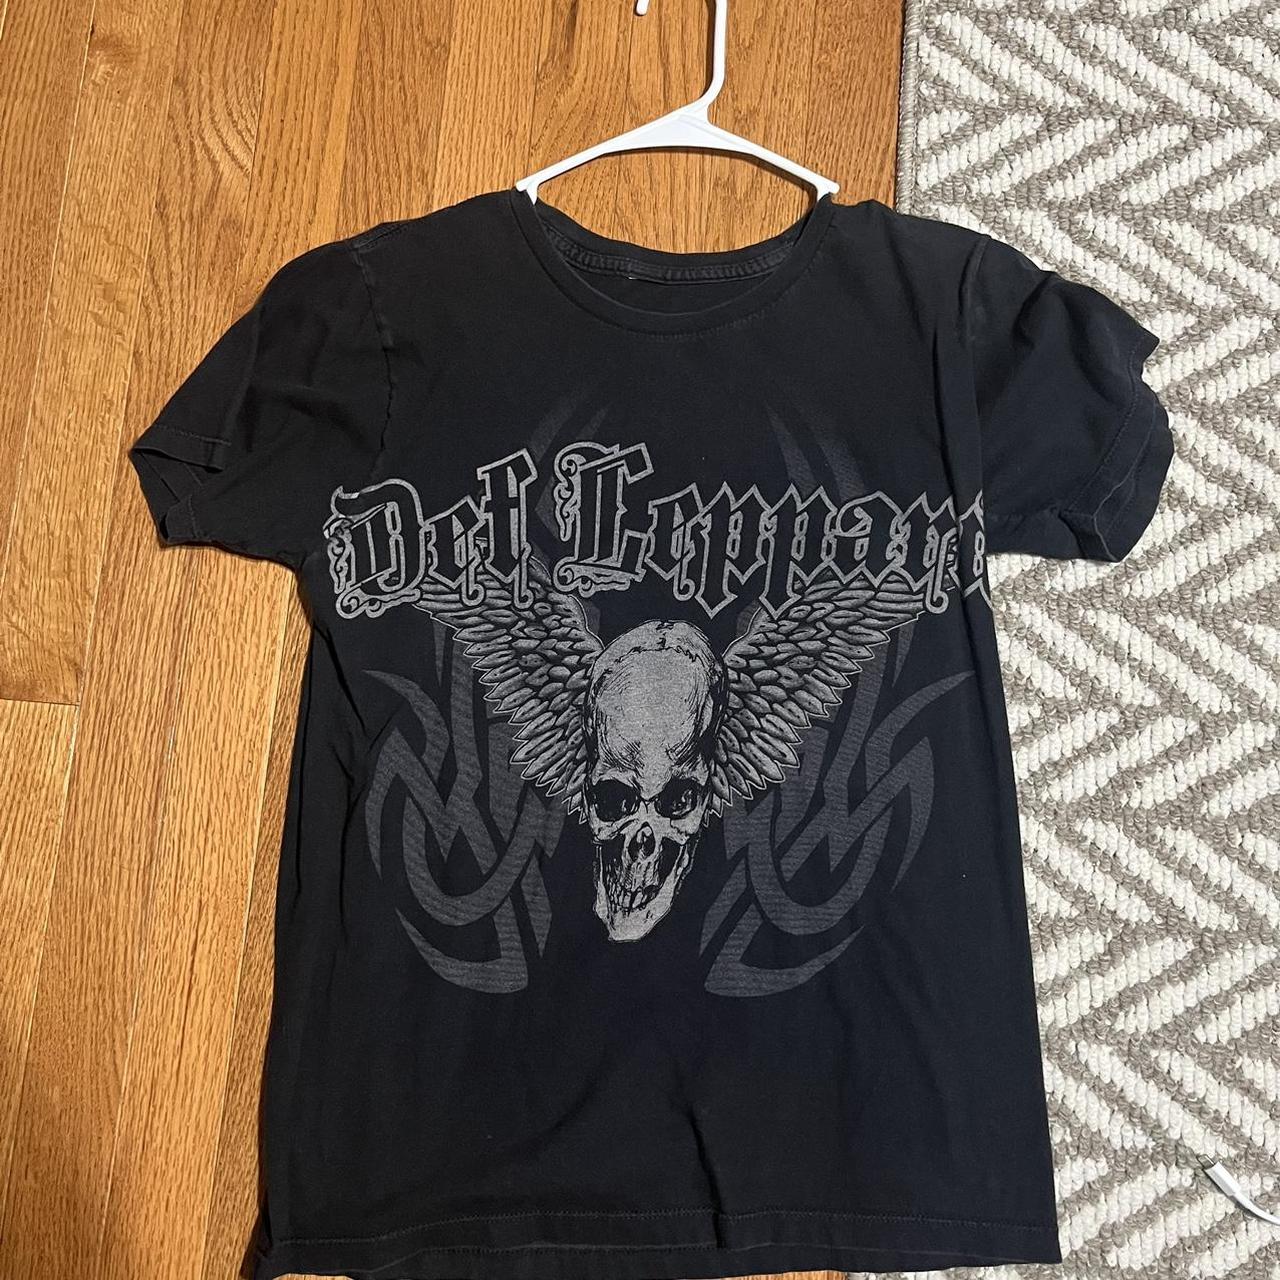 Def leppard vintage emo band tee Tight for perfect... - Depop